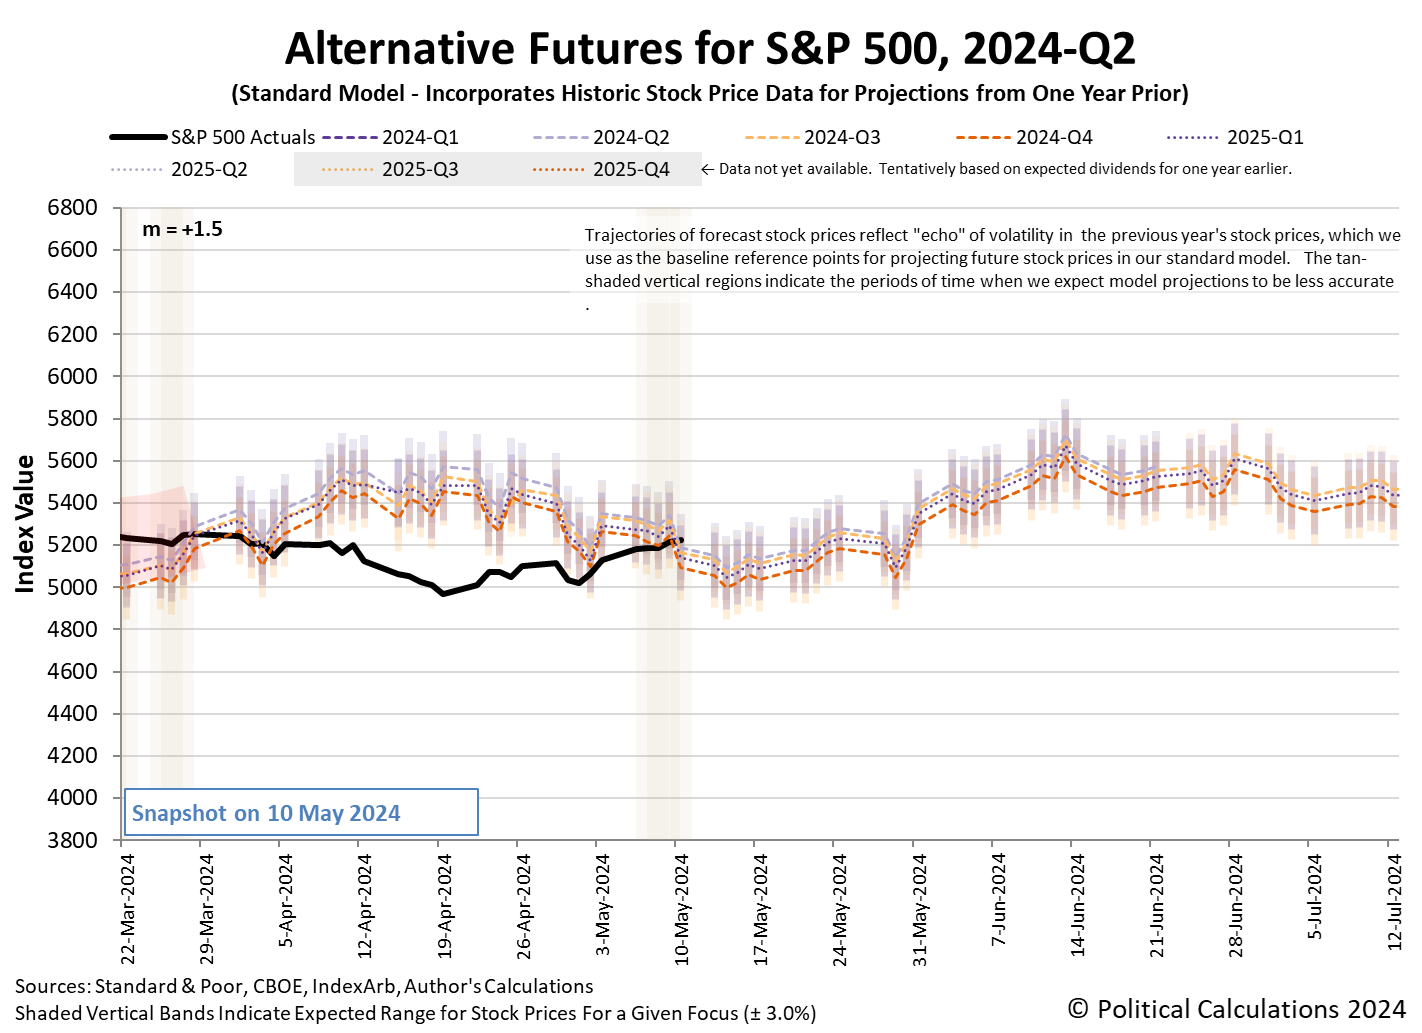 Alternative Futures - S&P 500 - 2024Q2 - Standard Model (m=+1.5 from 9 March 2023) - Snapshot on 10 May 2024